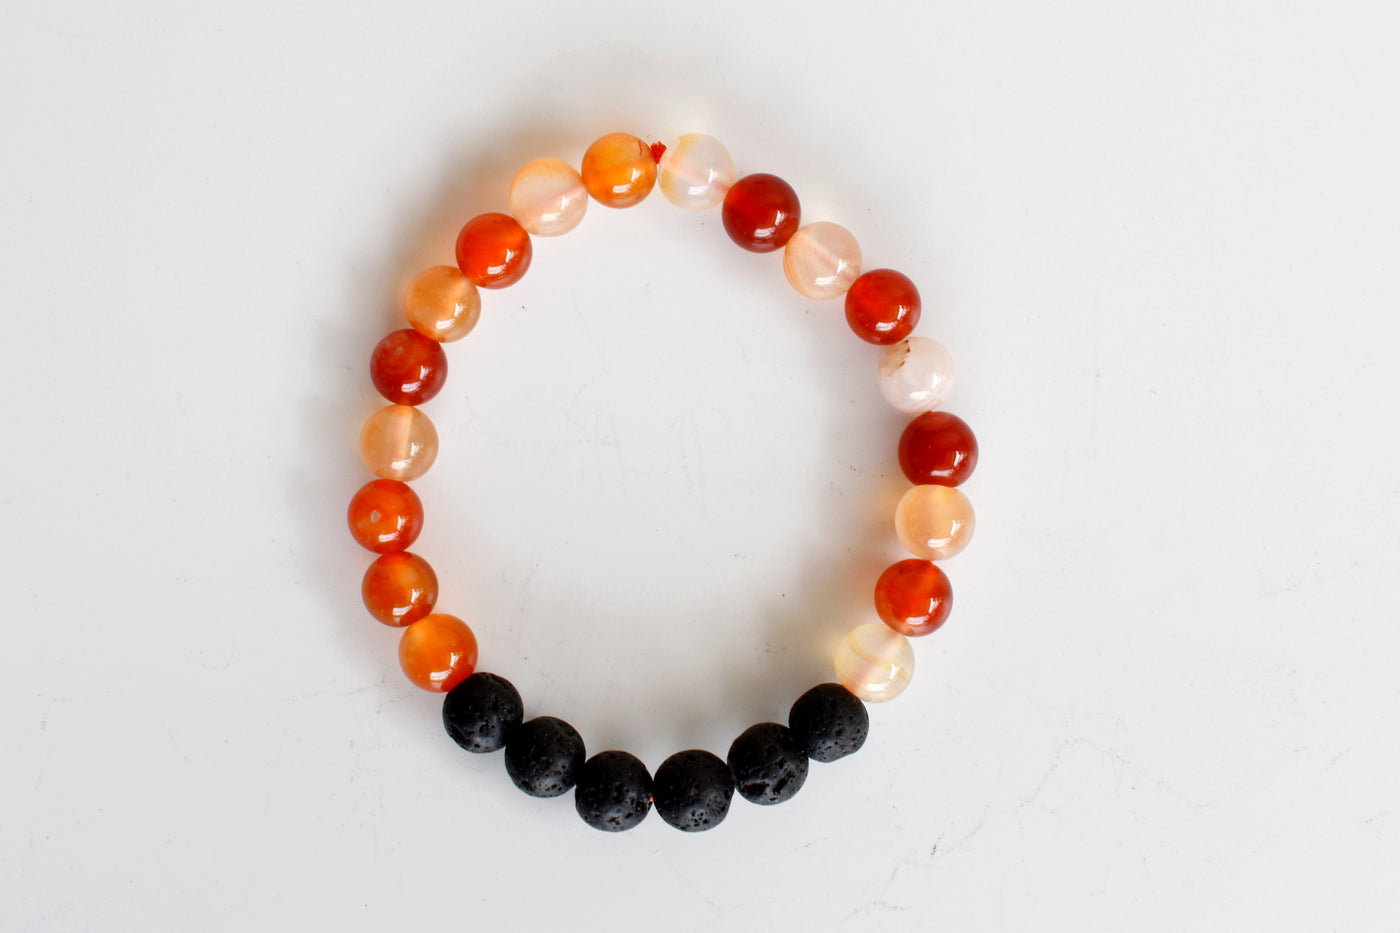 Carnelian Diffuser Bracelet, Lava Diffuser Jewelry, Aromatherapy, Essential Oil Bracelet, Spiritual Gift, Yoga Gift for Her